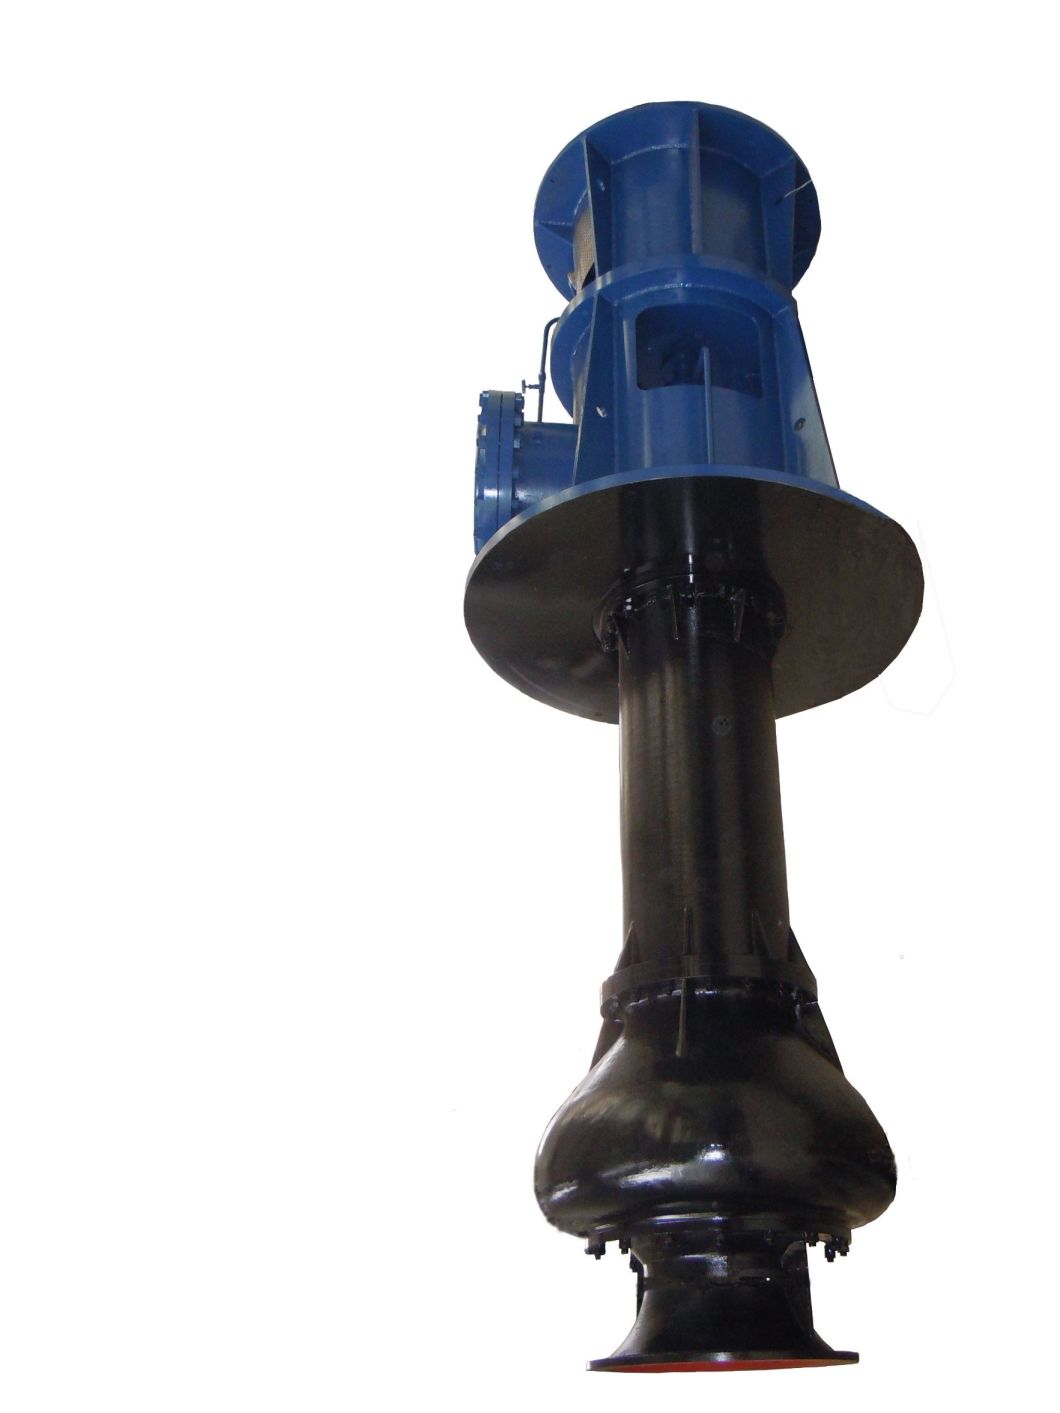 Primary Water Treatment Plant VLC Long Shaft Pump